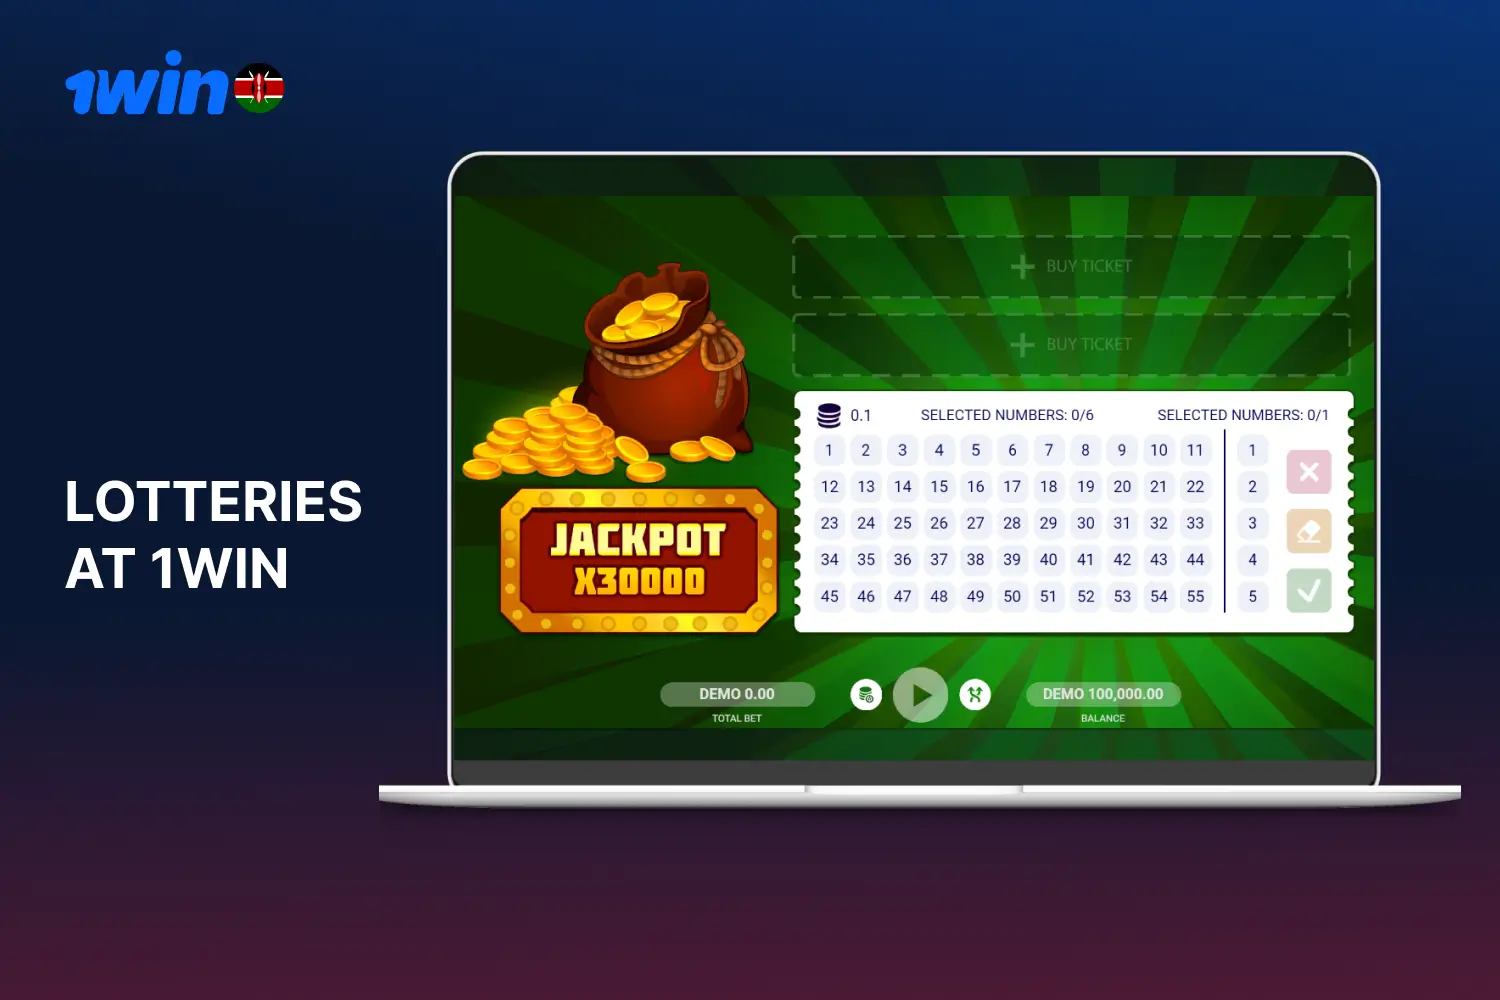 1win casino offers its users from Kenya to play various lottery options such as keno, bingo and scratch cards